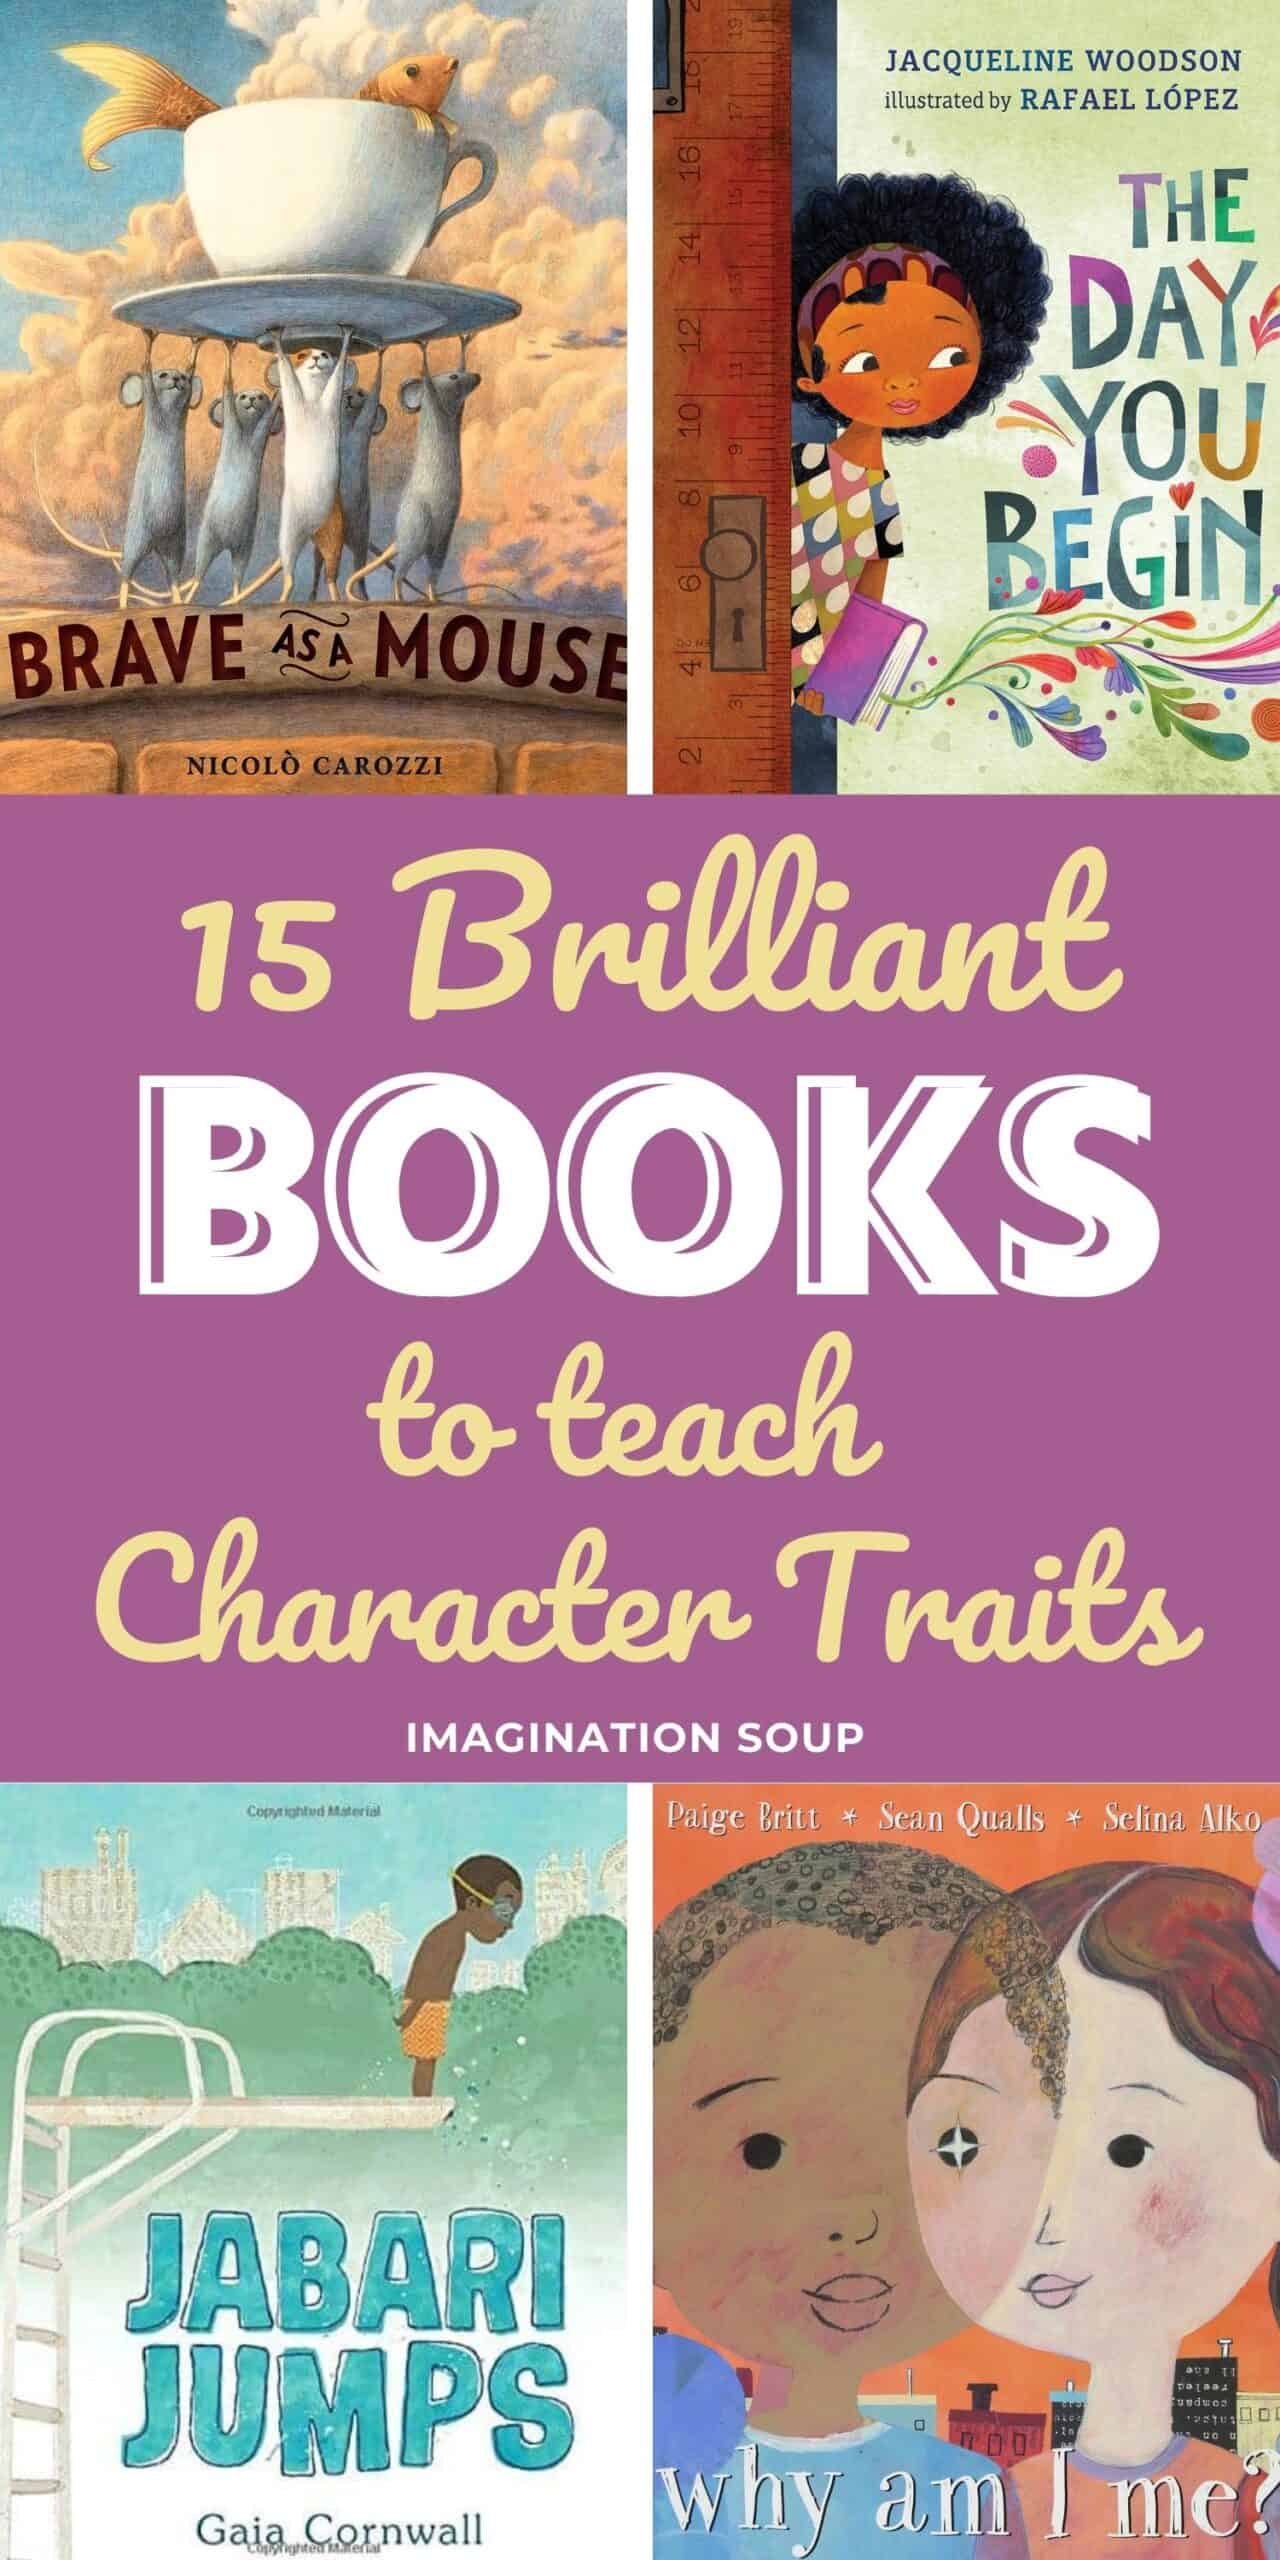 Teaching Positive Character Traits Through Picture Books